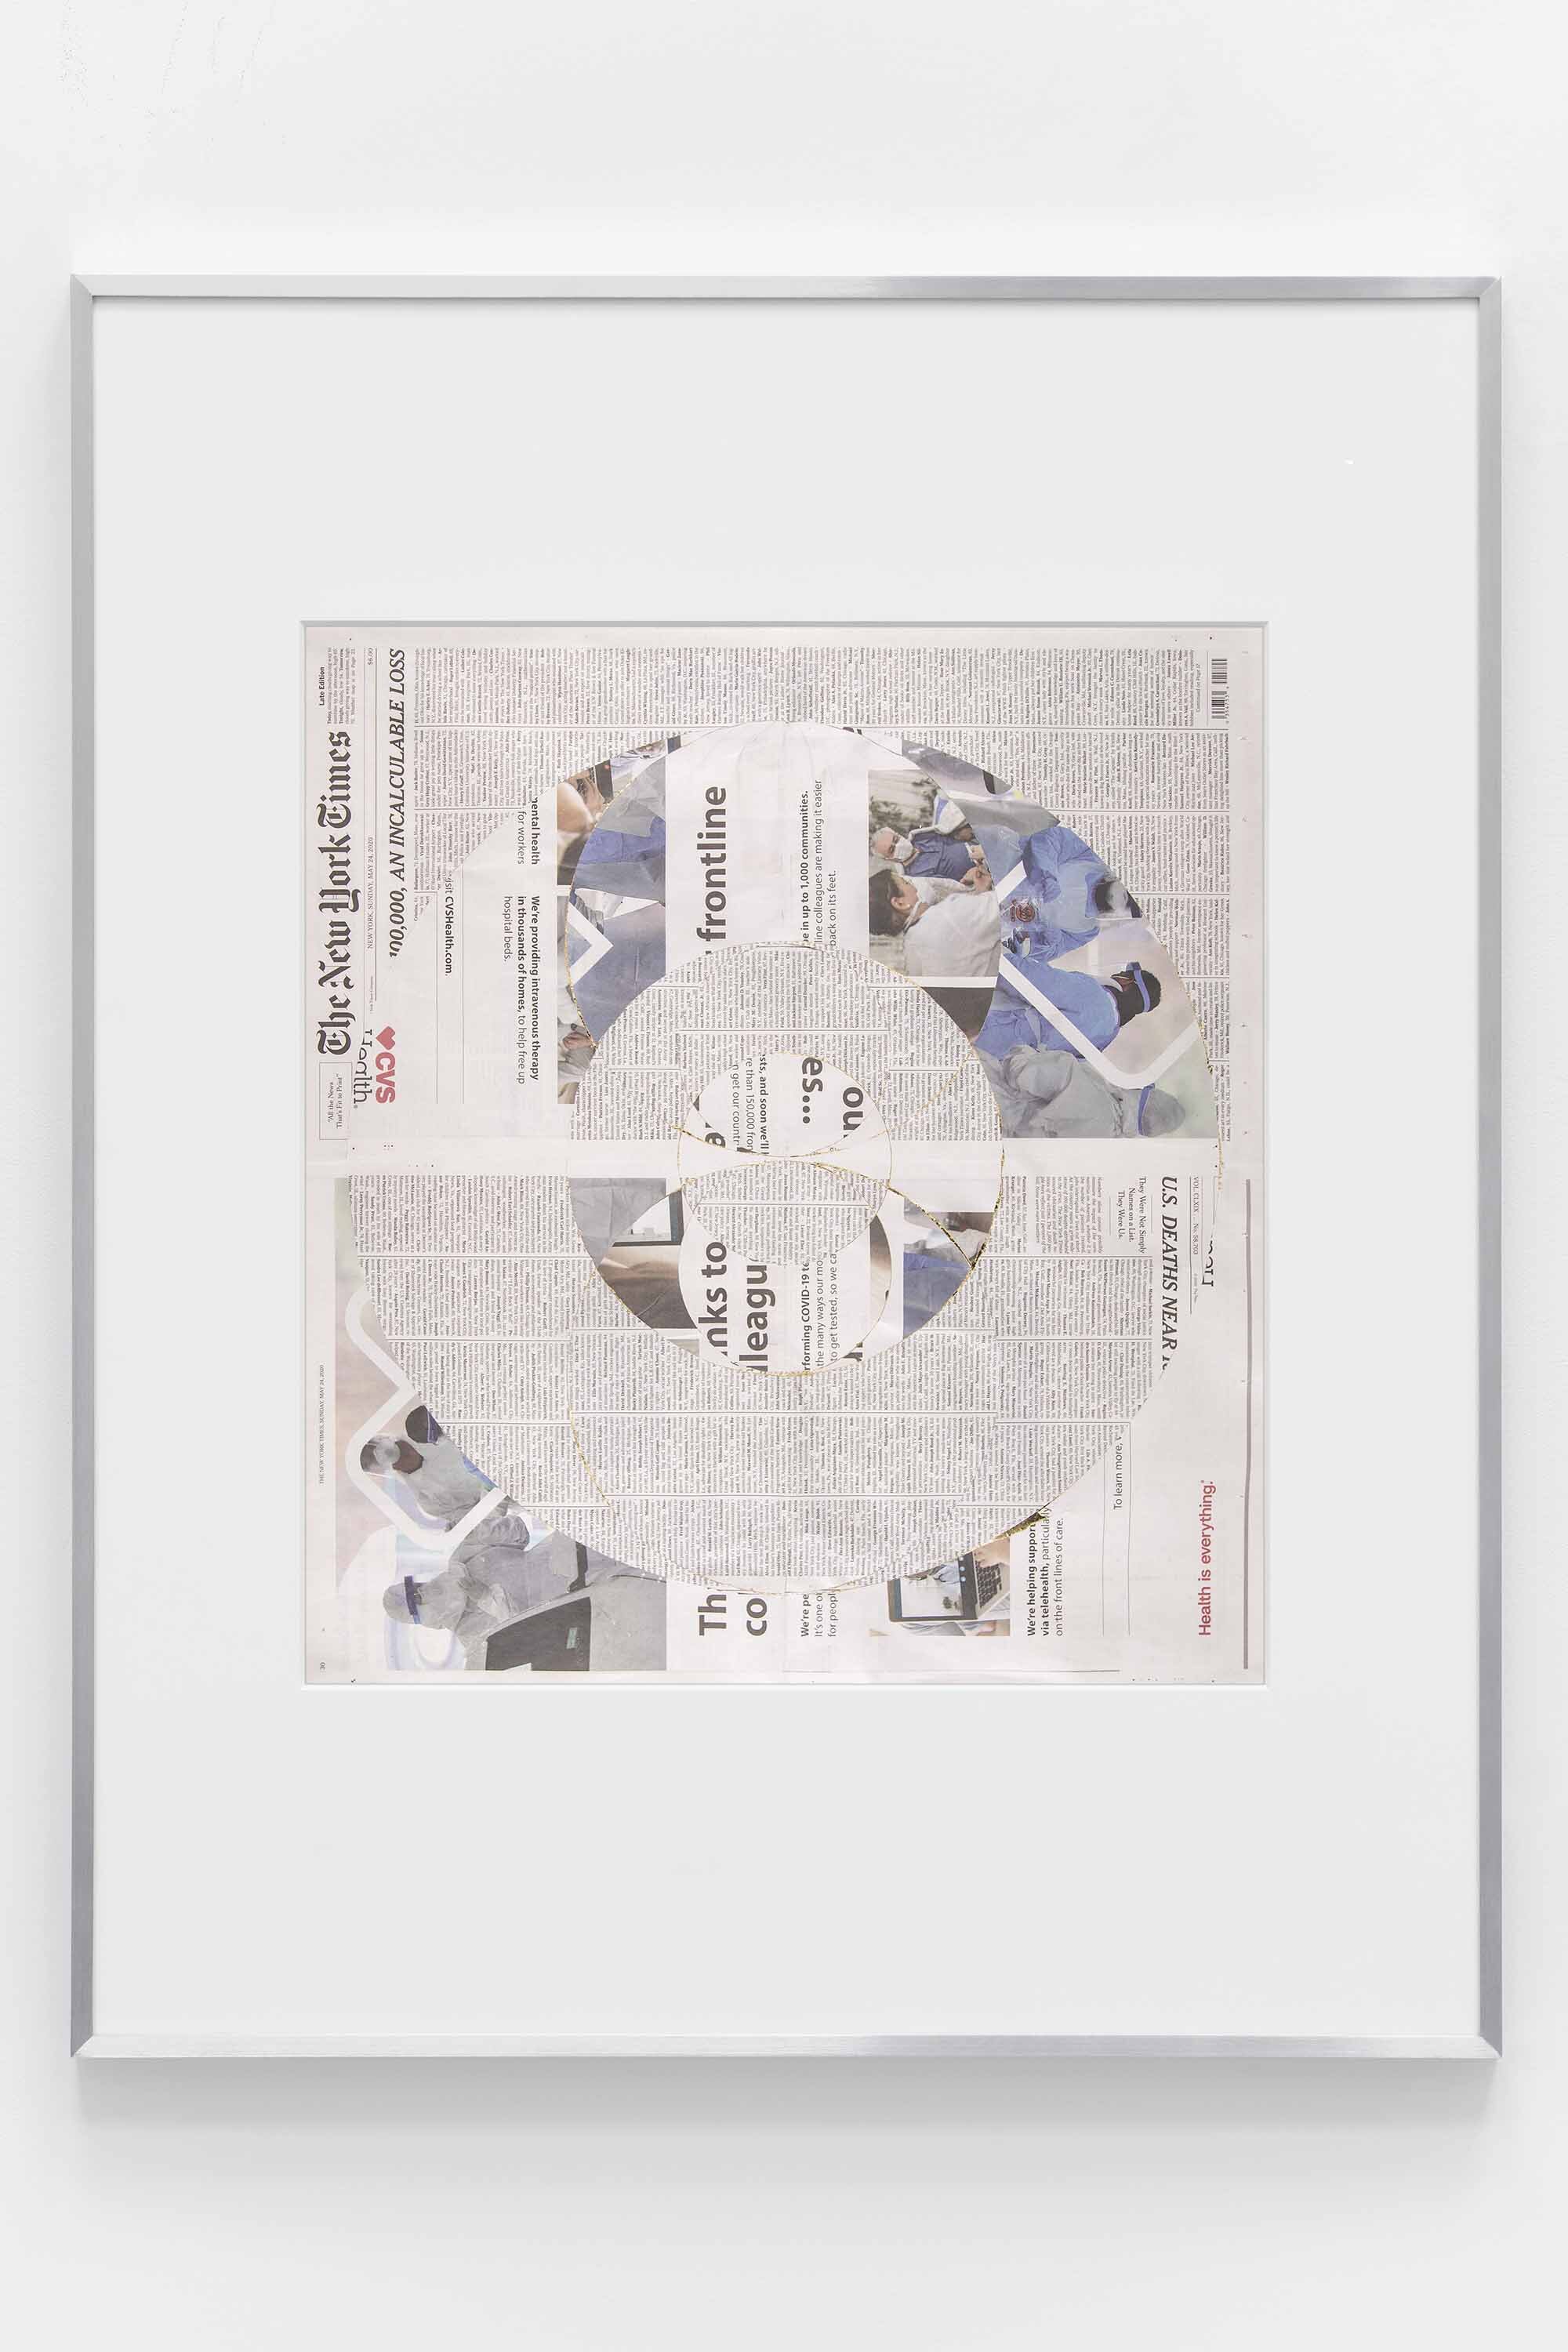   Blind Collage (Seven 180º Rotations, The New York Times: New York City, New York, Sunday, May 24, 2020)    2021   Newspaper, tape, and 22 karat gold leaf  39 1/8 x 31 1/4 inches   Blind Collages, 2017–  